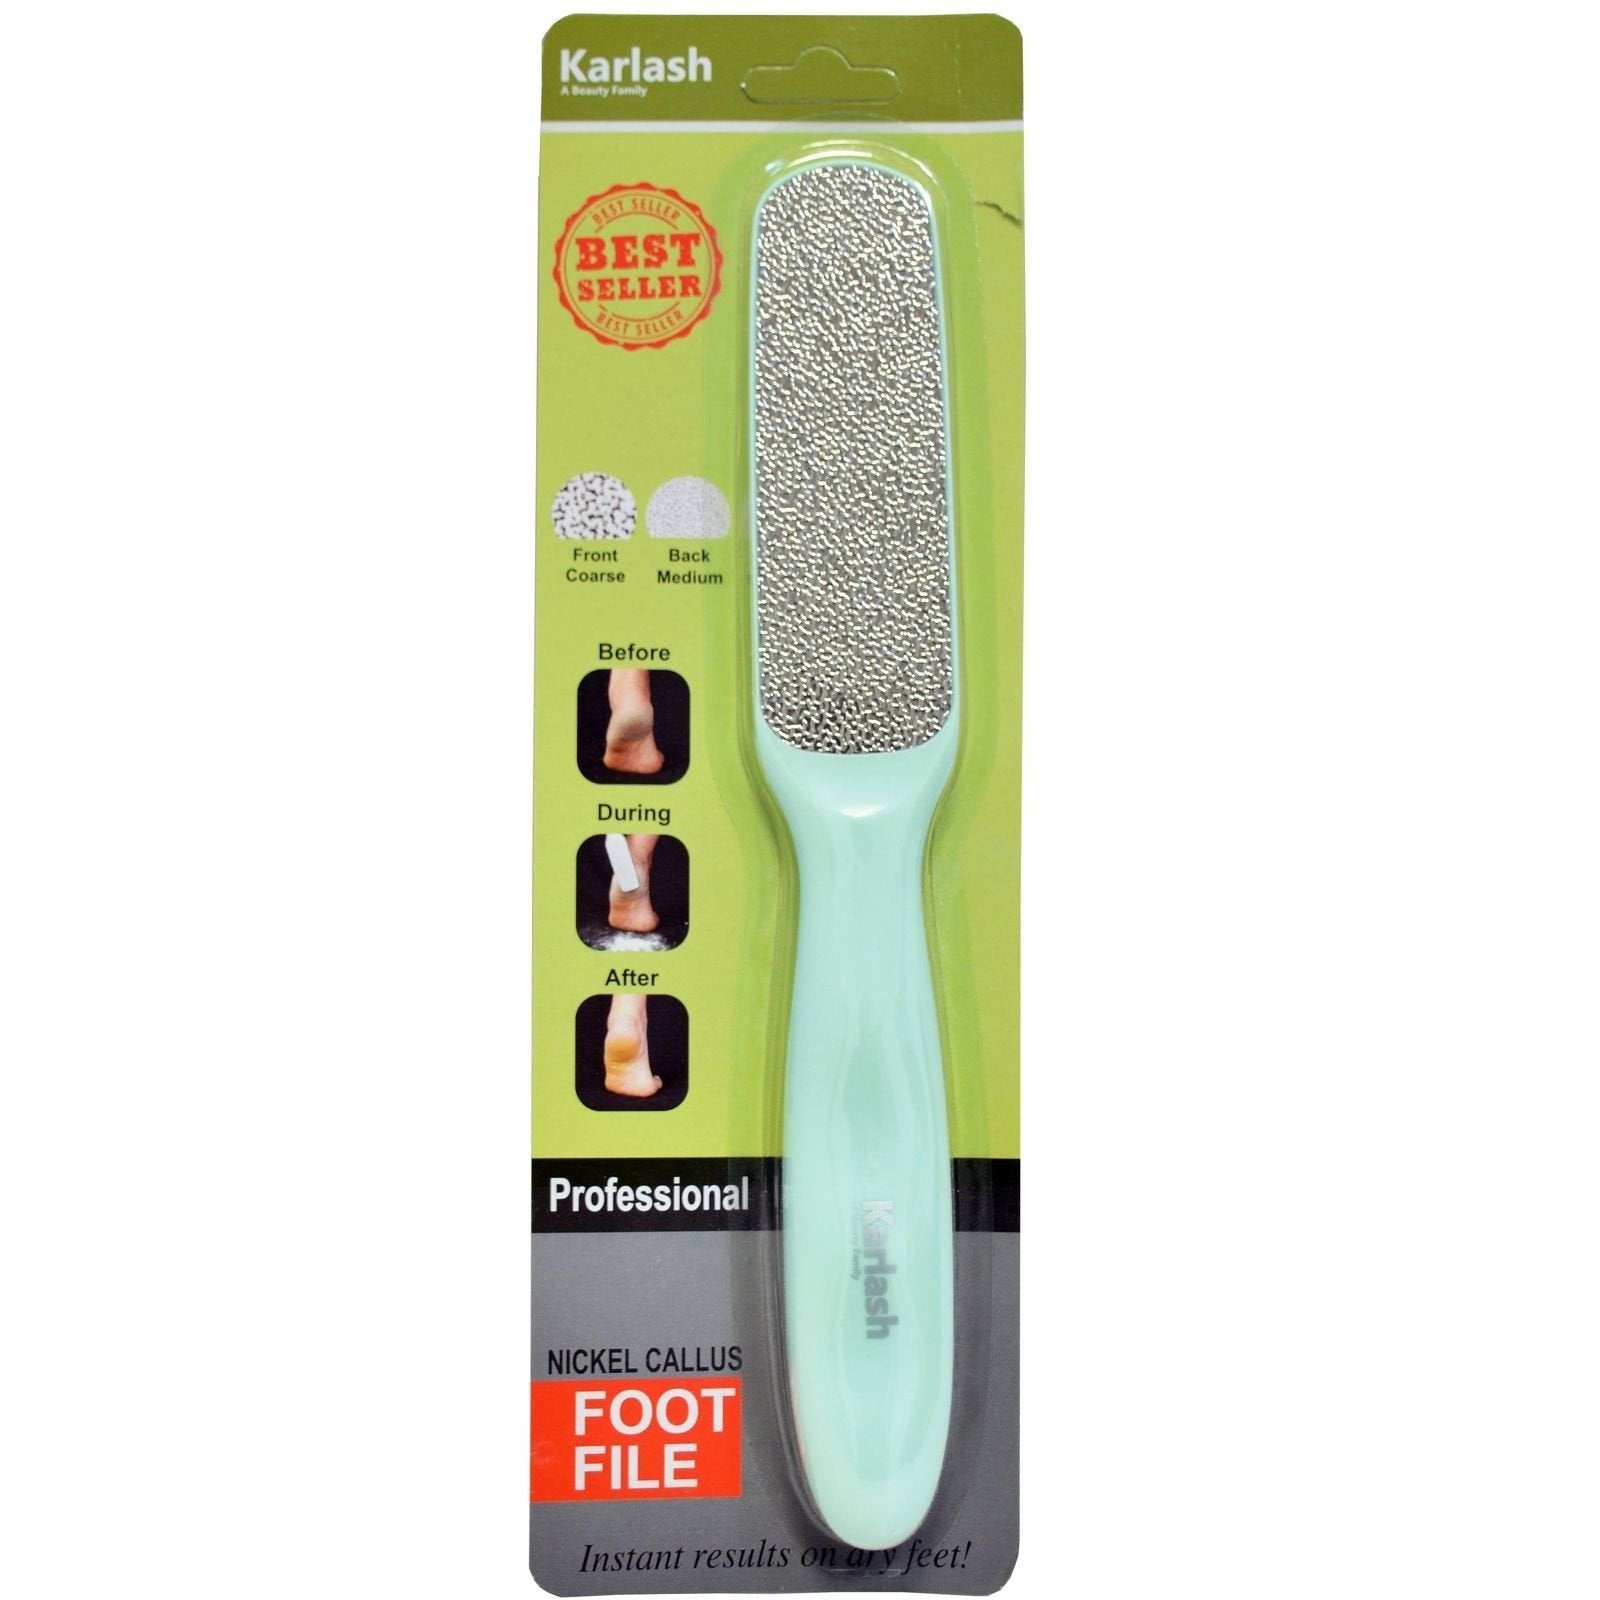 Karlash 2-Sided Hypoallergenic Nickel Foot File for Callus Trimming and Callus Removal, Mint Green